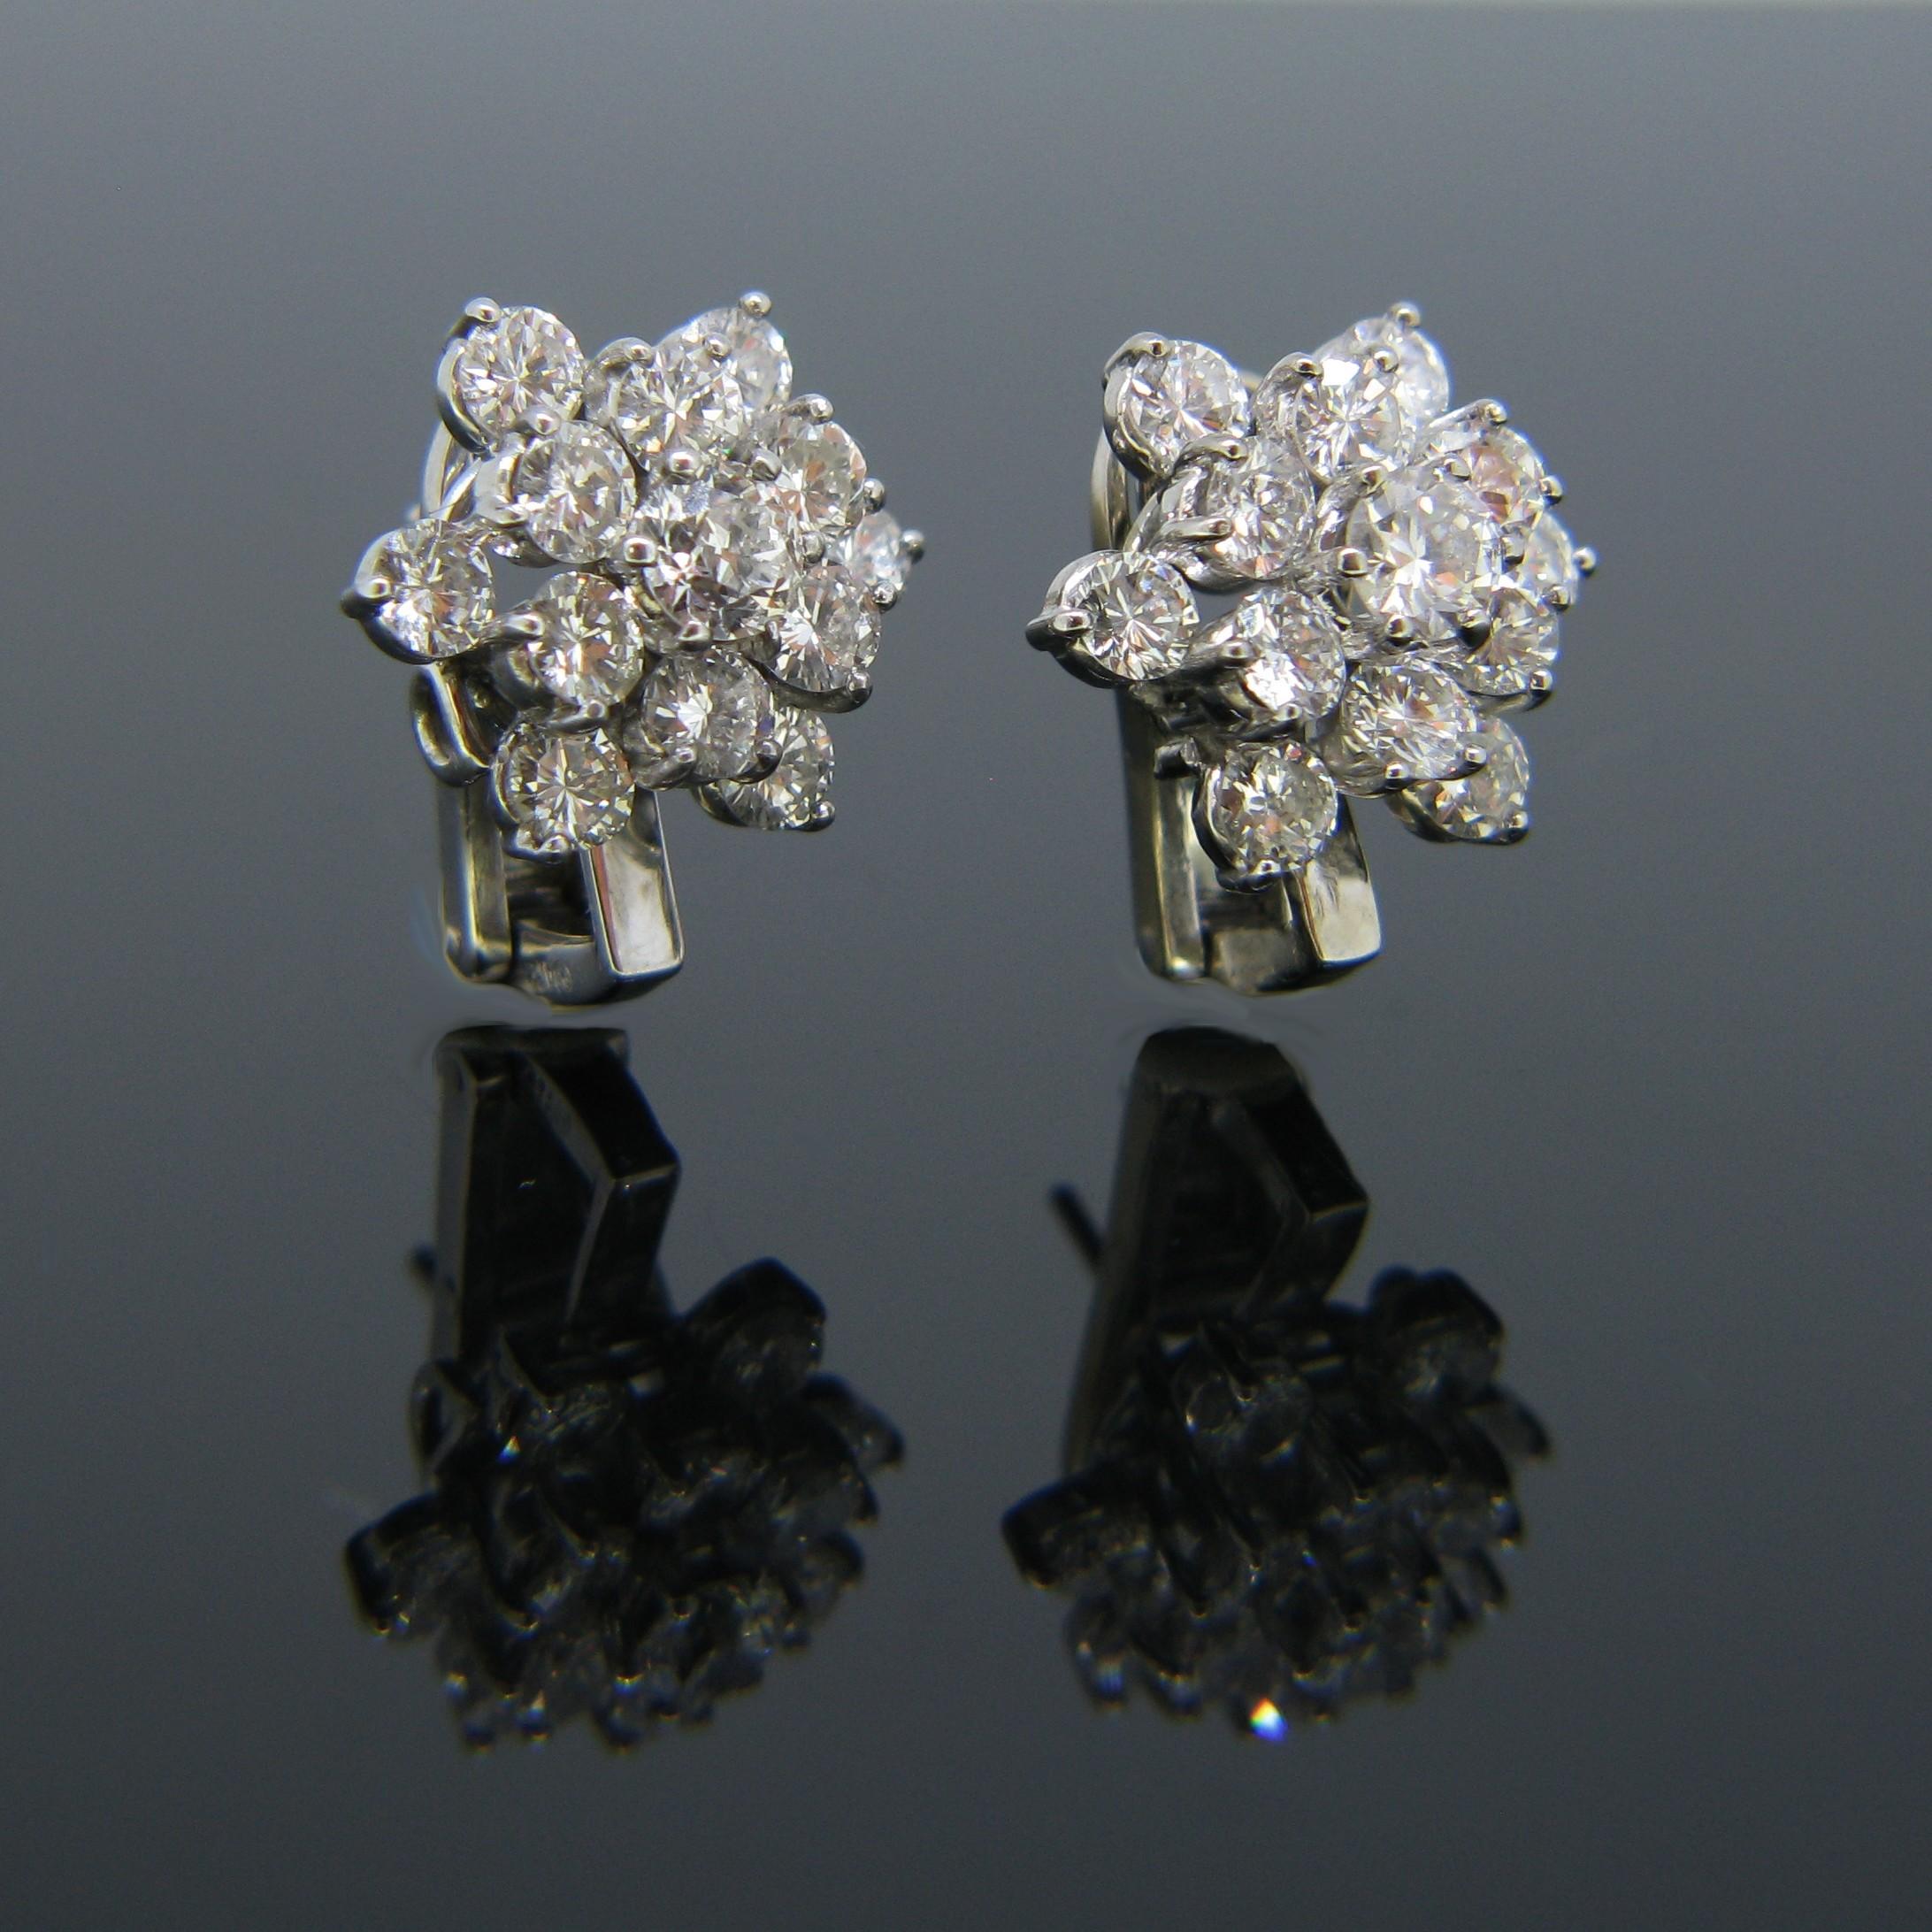 These lovely earrings feature 26 round cut diamonds with good colour and good clarity which adds up to a total carat weight of 3.70ct. The back is made in 18kt white gold and the diamonds are set in platinum. They are very comfortable to wear and